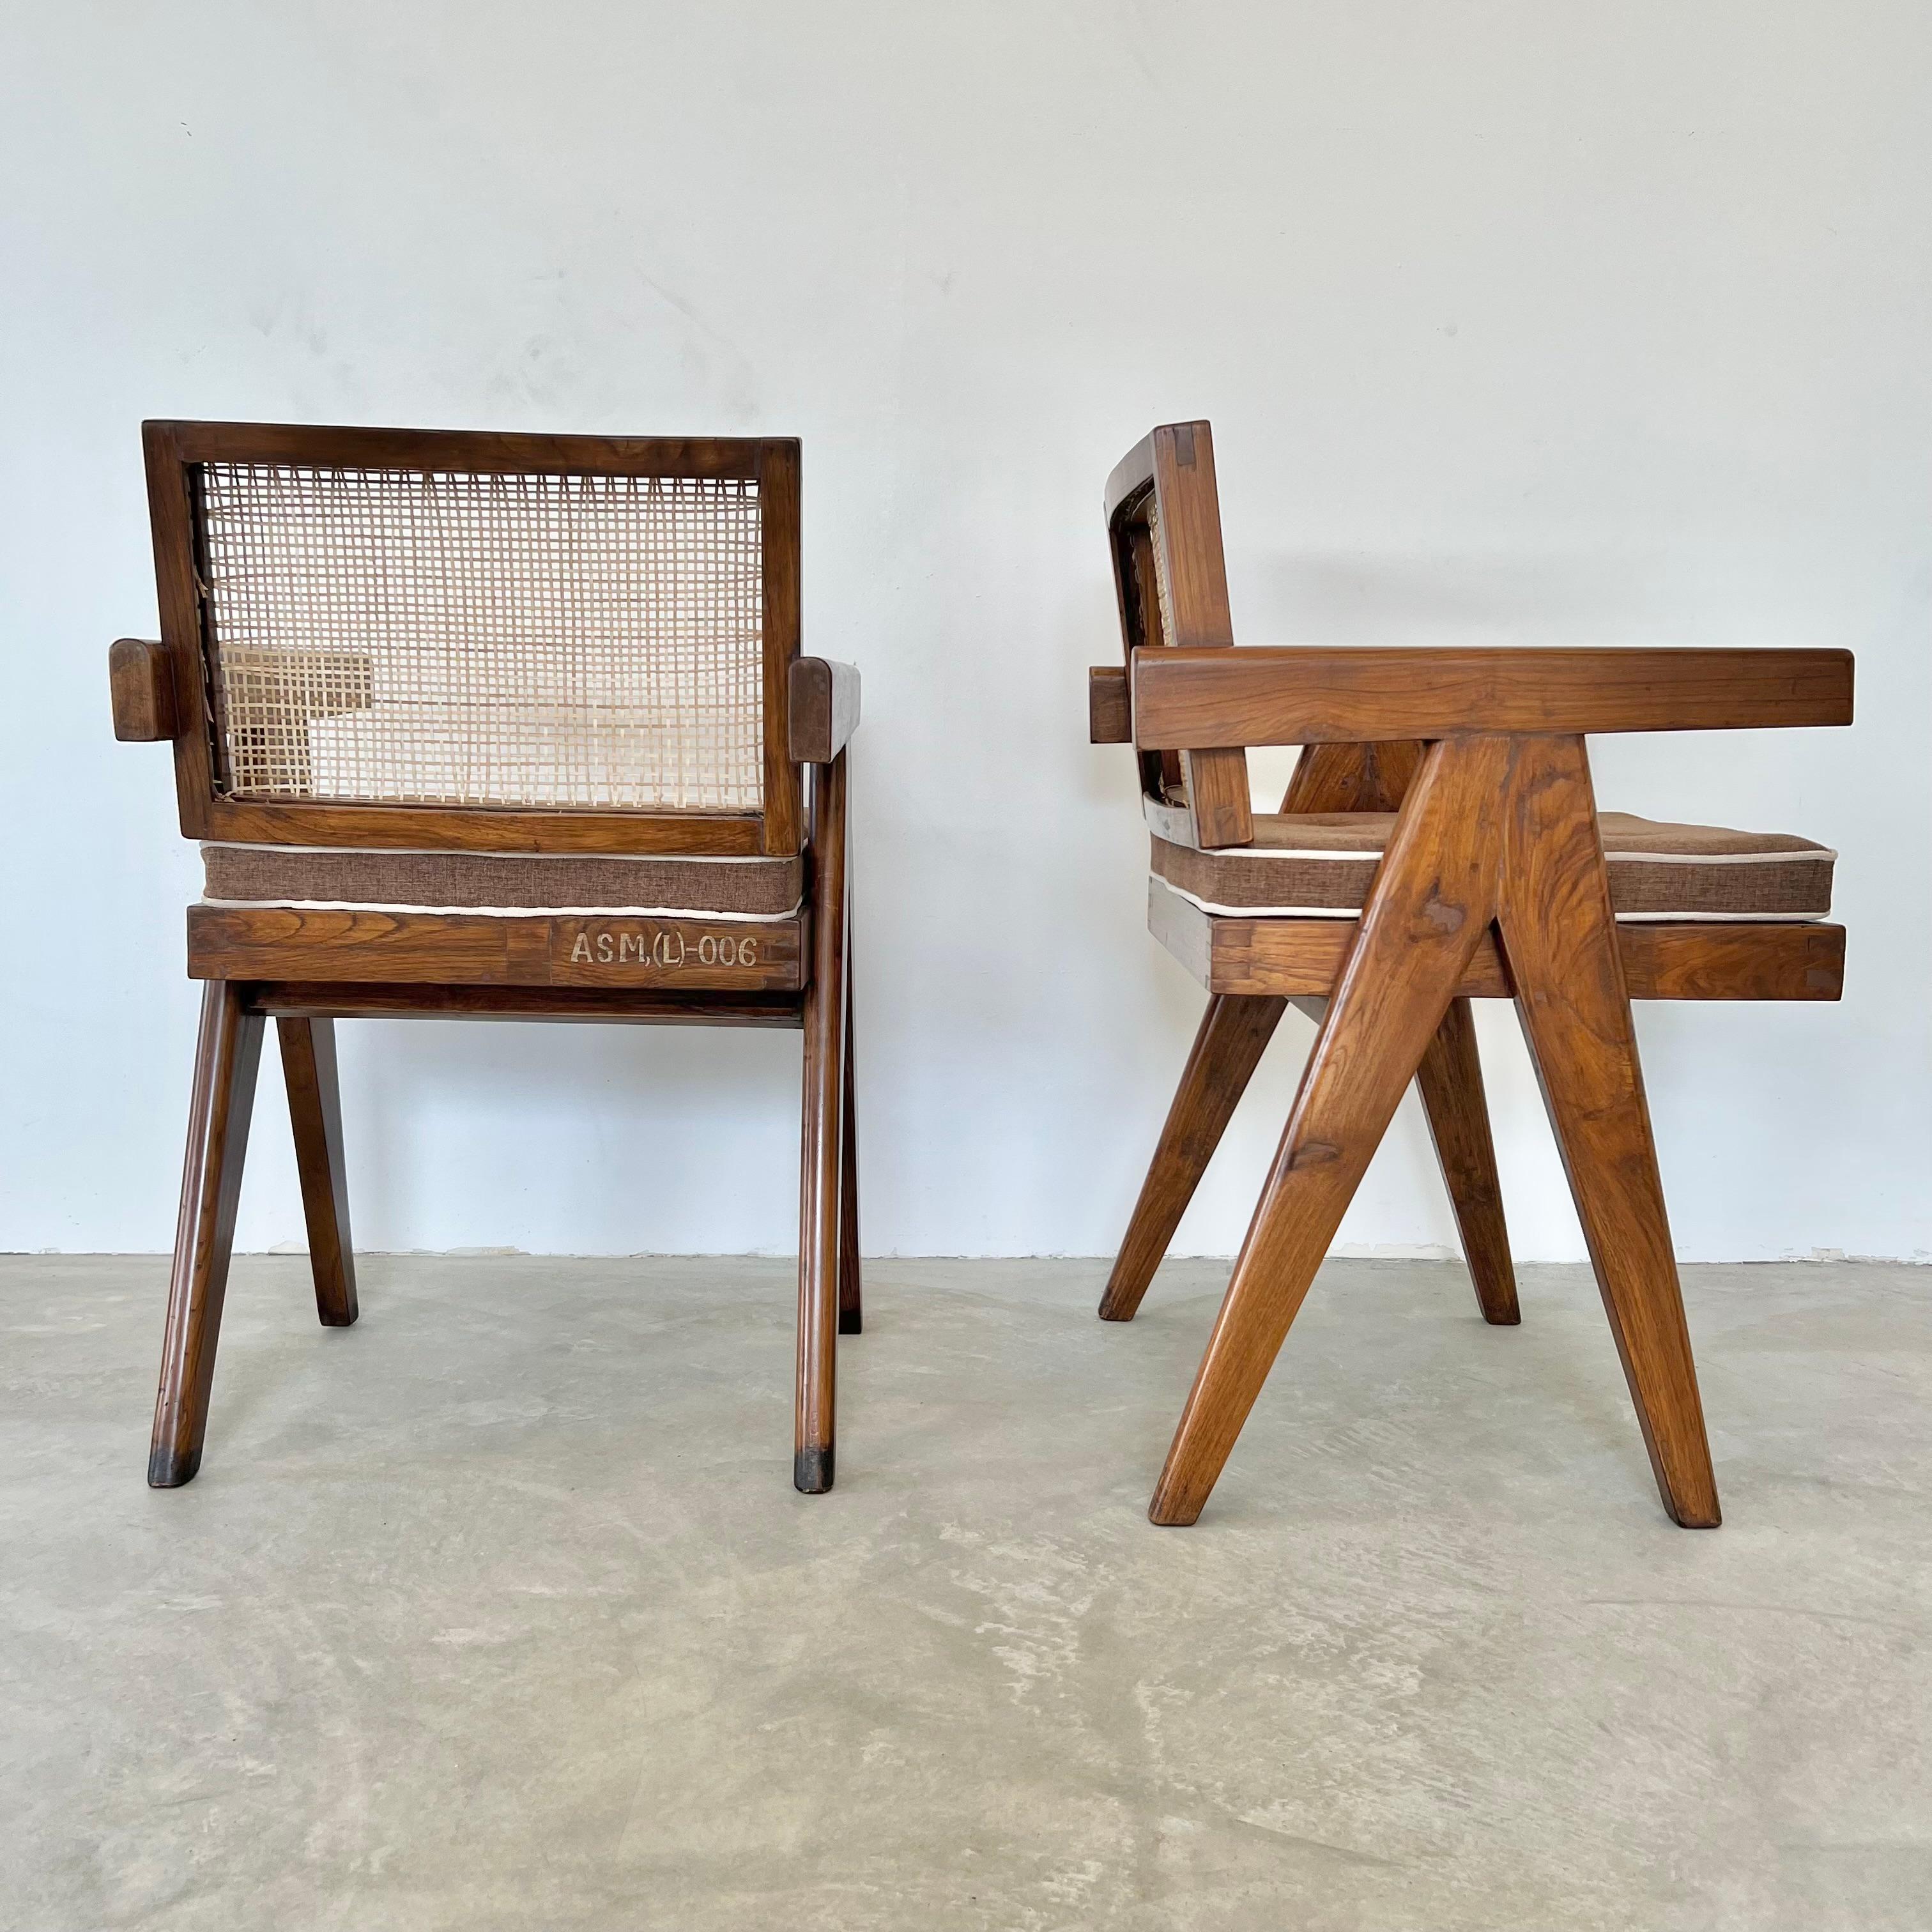 Cane Pierre Jeanneret Office Chairs, 1950s Chandigargh For Sale